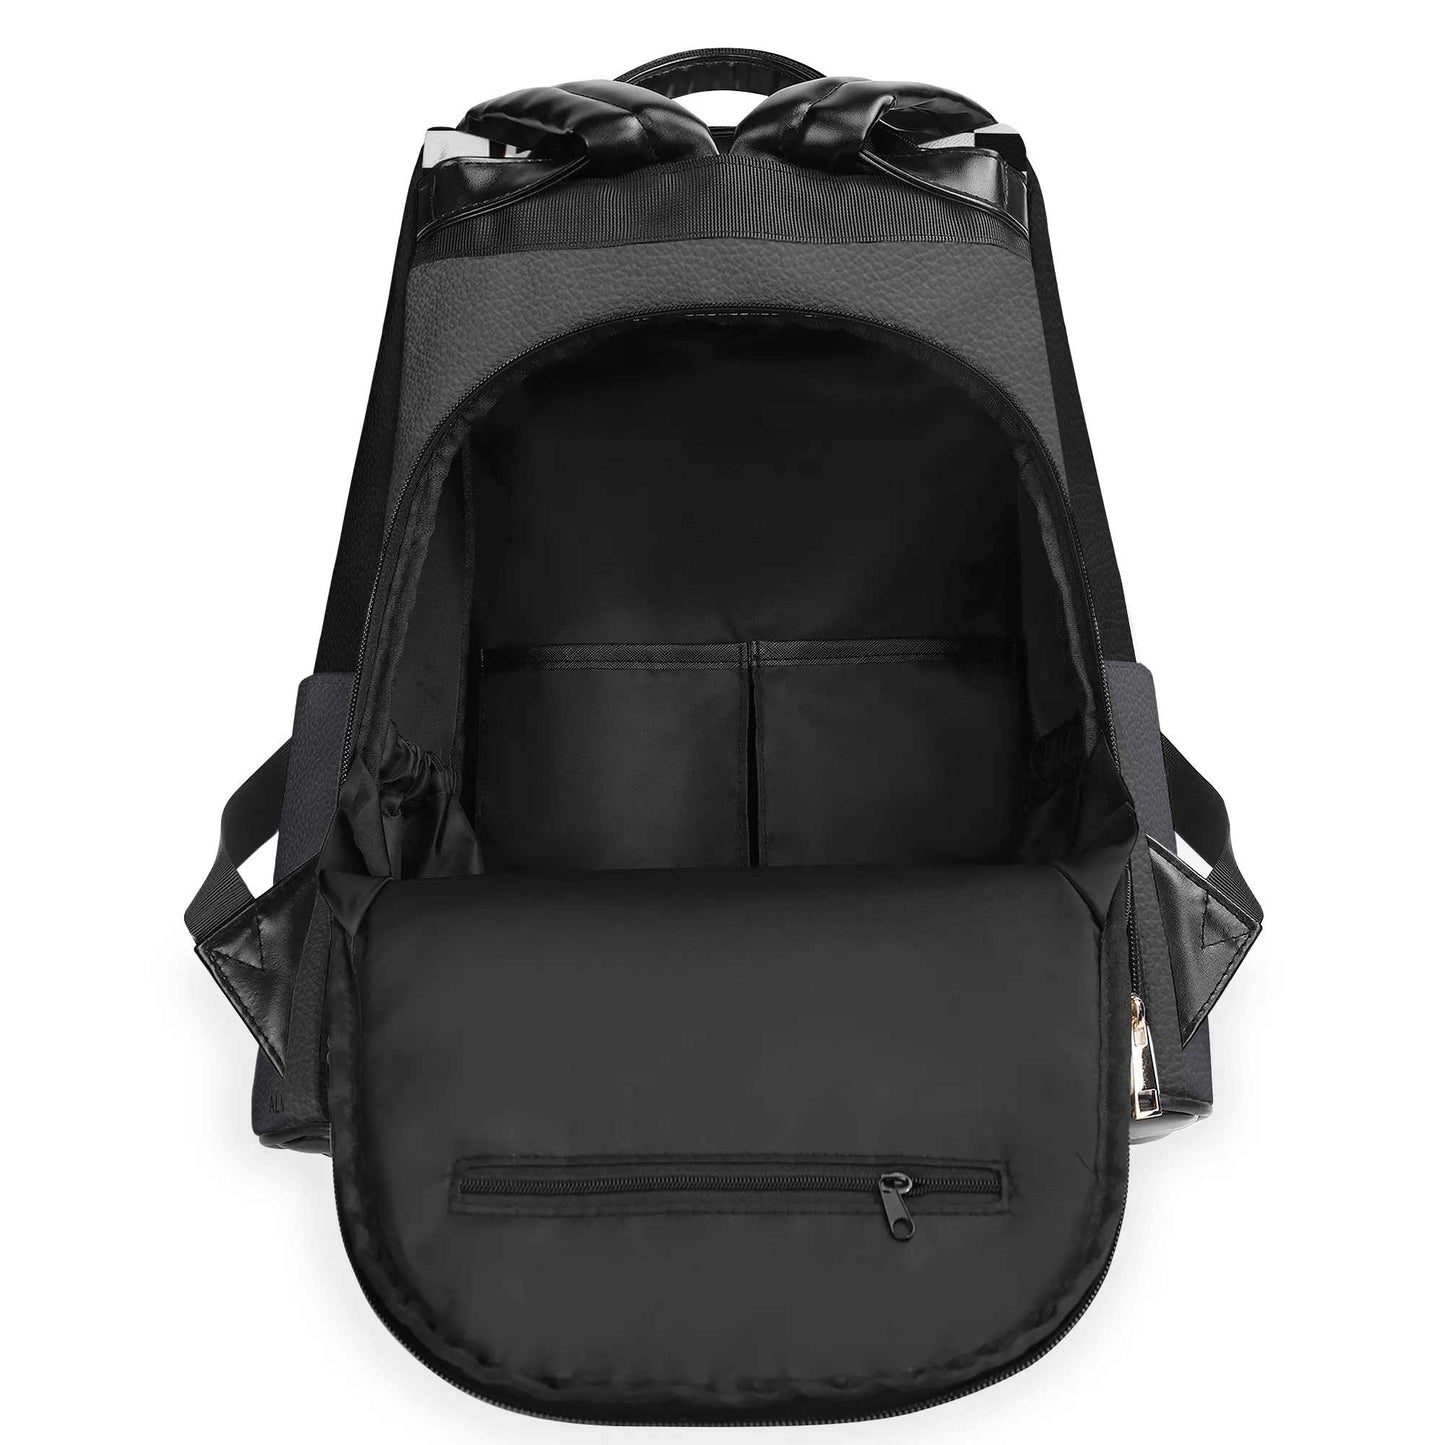 And HE Lifted Heavily Ever After - Personalized Leather BackPack - BP_FN04